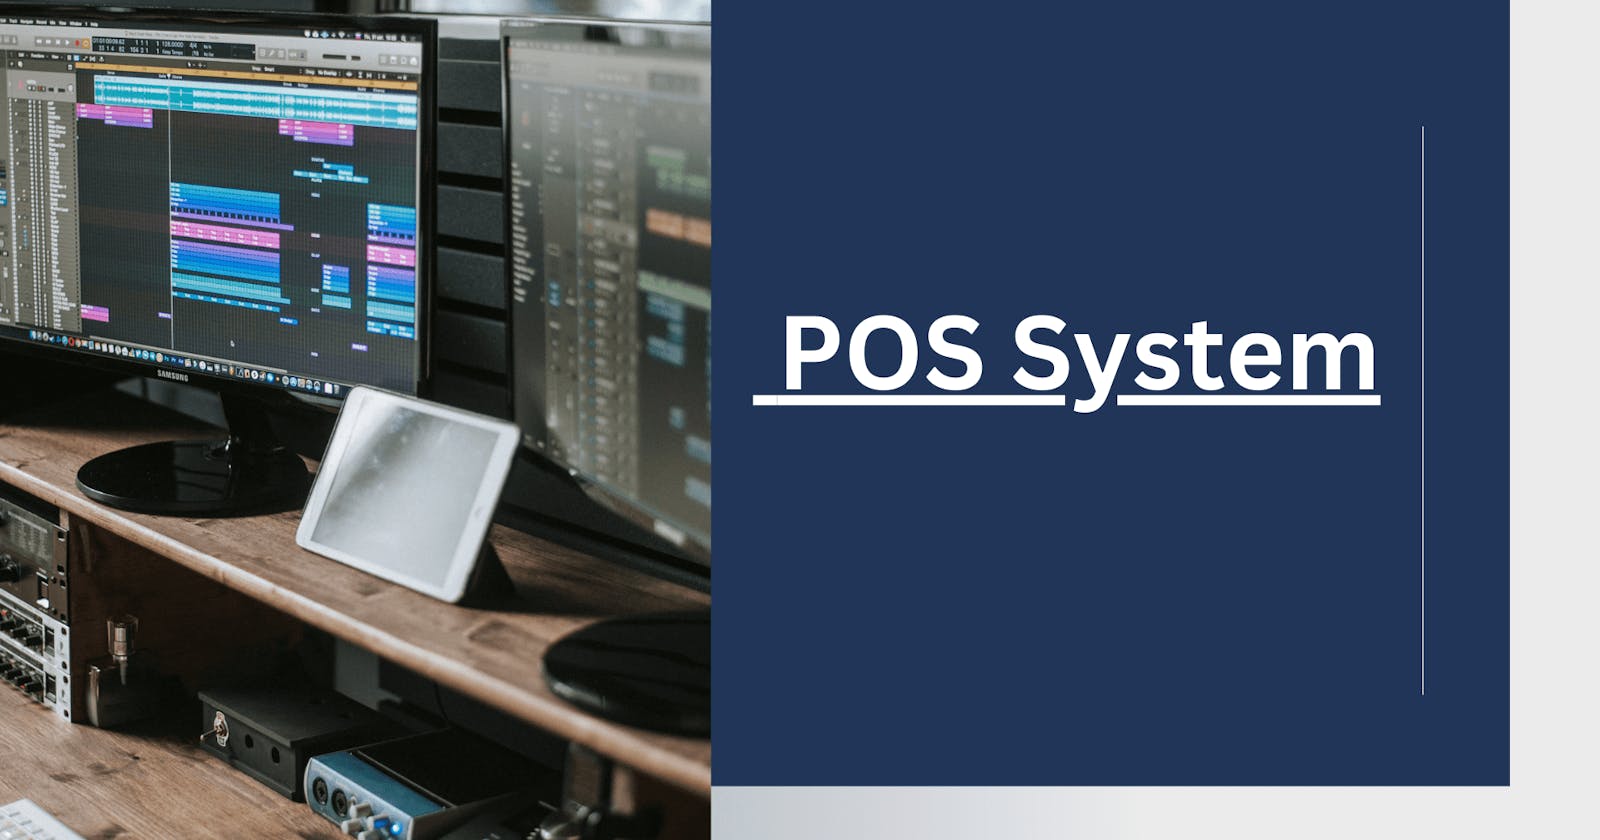 The influence of POS systems on restaurant financial performance